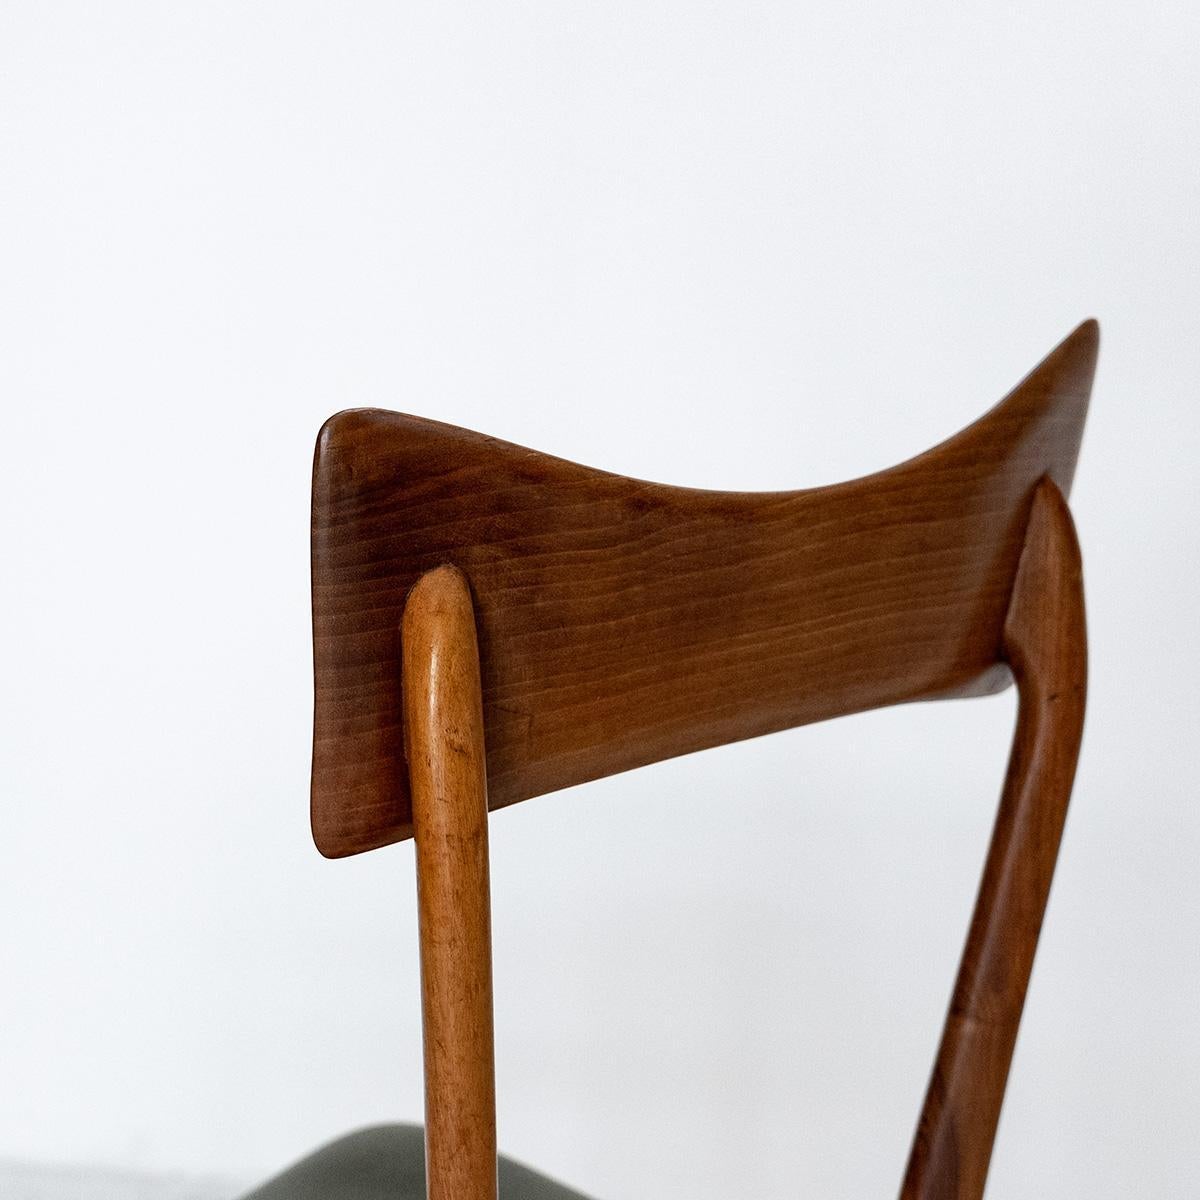 Mid-20th Century Italian Dining Chairs by Ico Parisi and Luisa Parisi for Ariberto Colombo, 1950s For Sale